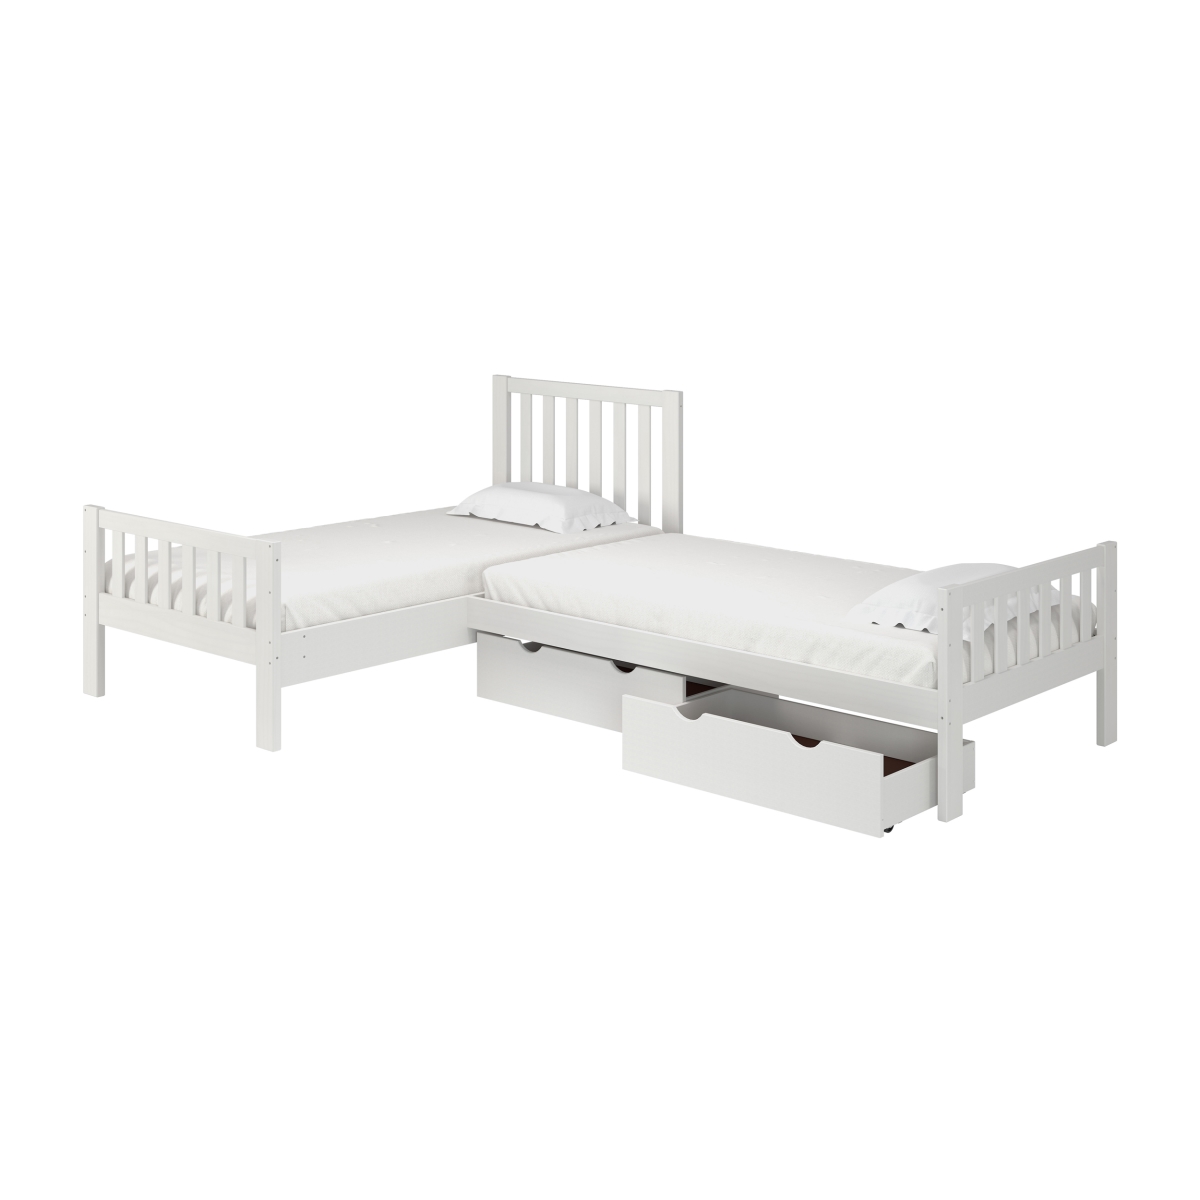 Picture of Alaterre AJAU11WHS Aurora Corner L-Shaped Twin Wood Bed Set with Storage Drawers, White